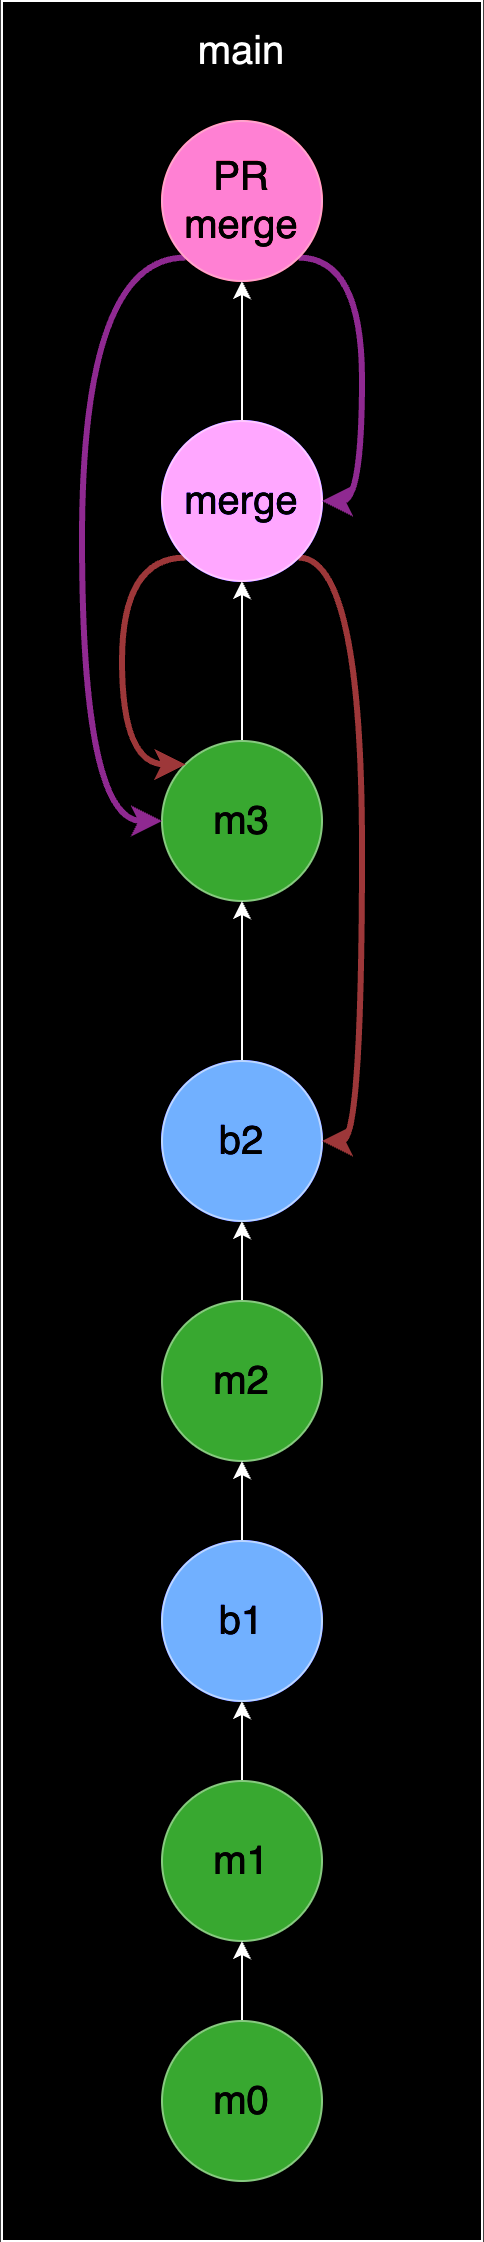 Diagram of commit history after pull request, showing two merge commits and their children